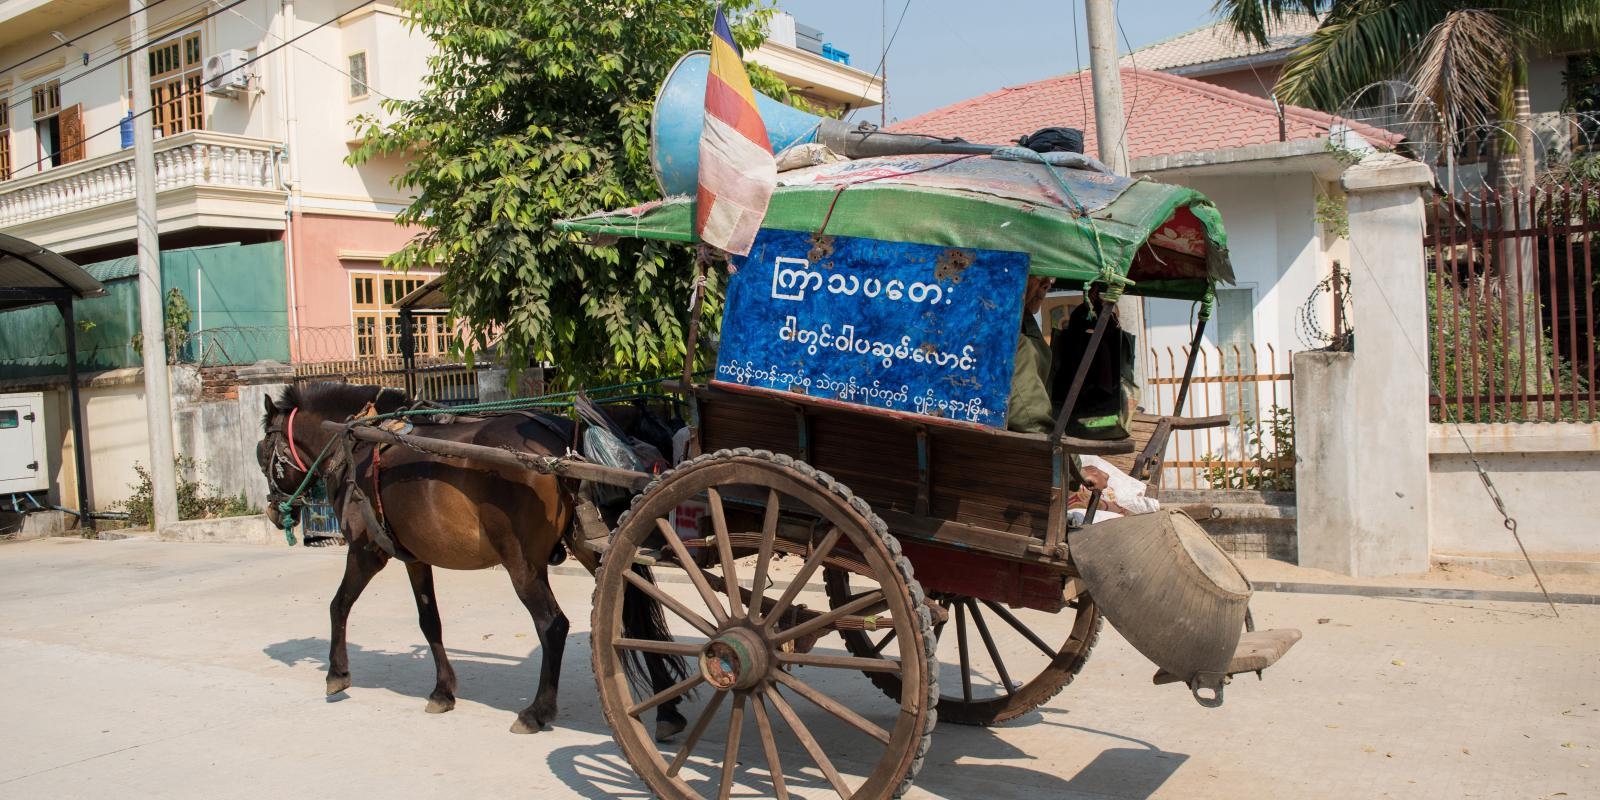 Simple horse-drawn cart with advertising poster for GoodVision Myanmar and loudspeaker